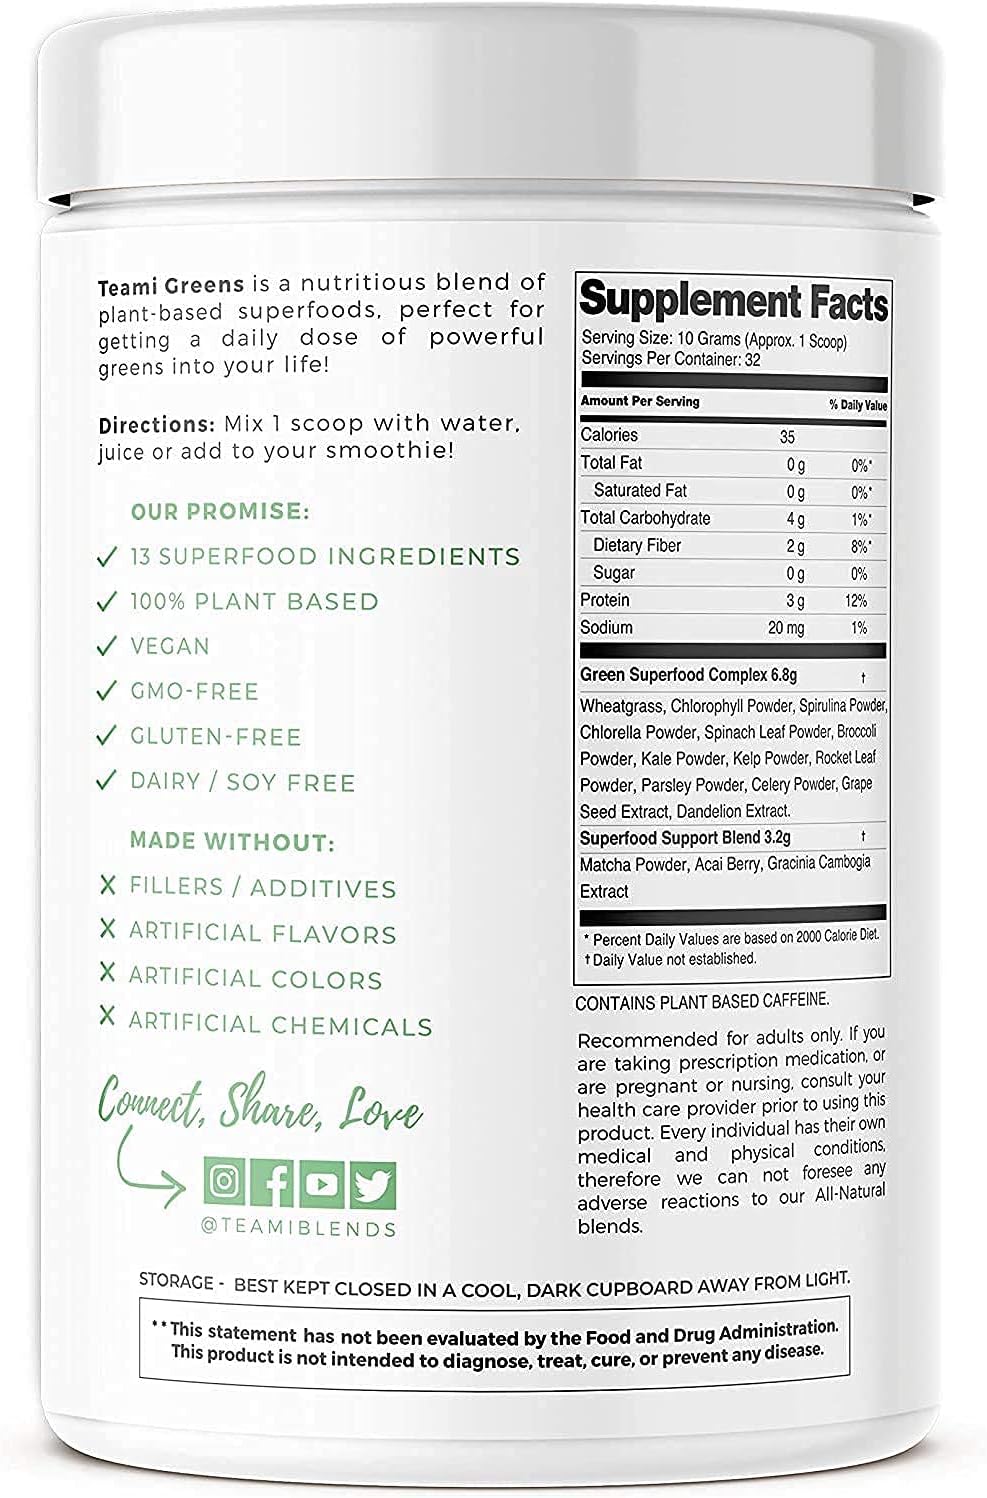 Teami Greens Superfood Powder, Bloat Reliefing and Digestive Health Supplement, Super Greens Powder with Mixed Veggie Organic Greens Juice with Spirulina, Spinach, Kale Acai for Smoothie Mix